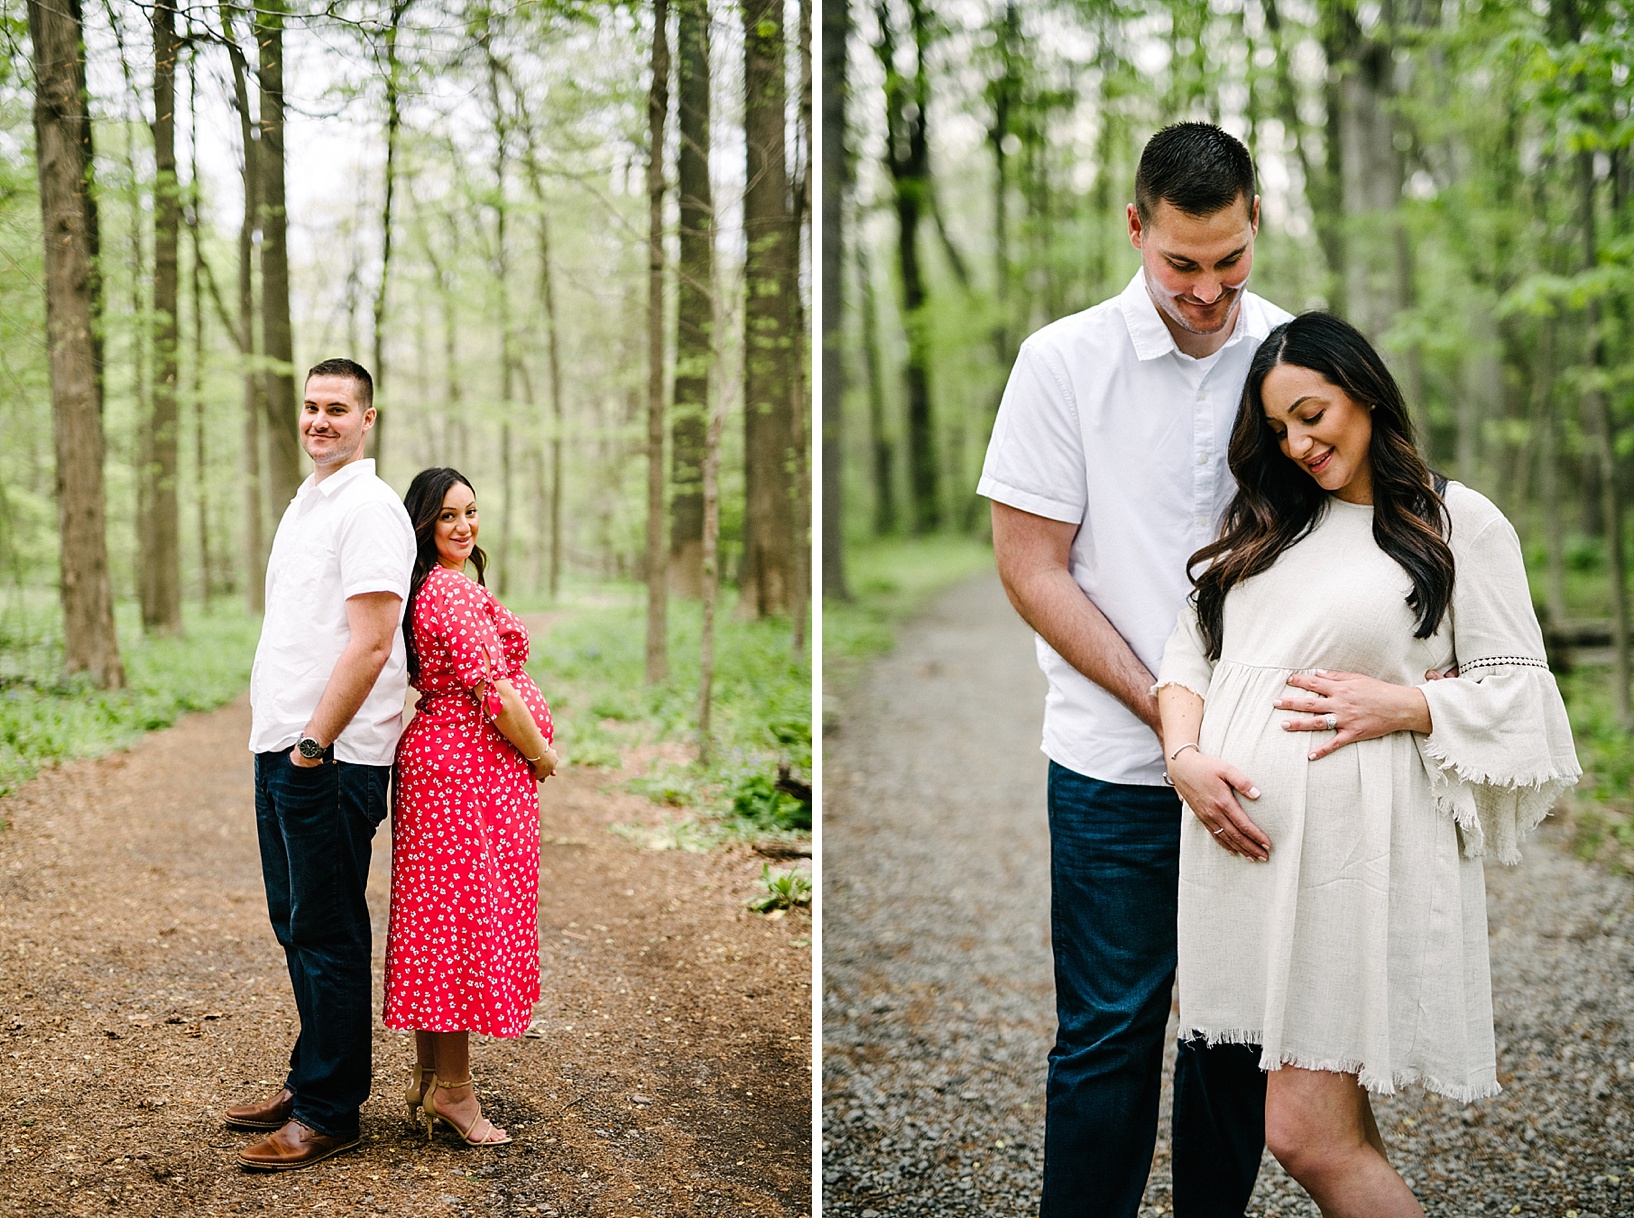 A couple smiling in woods during maternity photography shoot